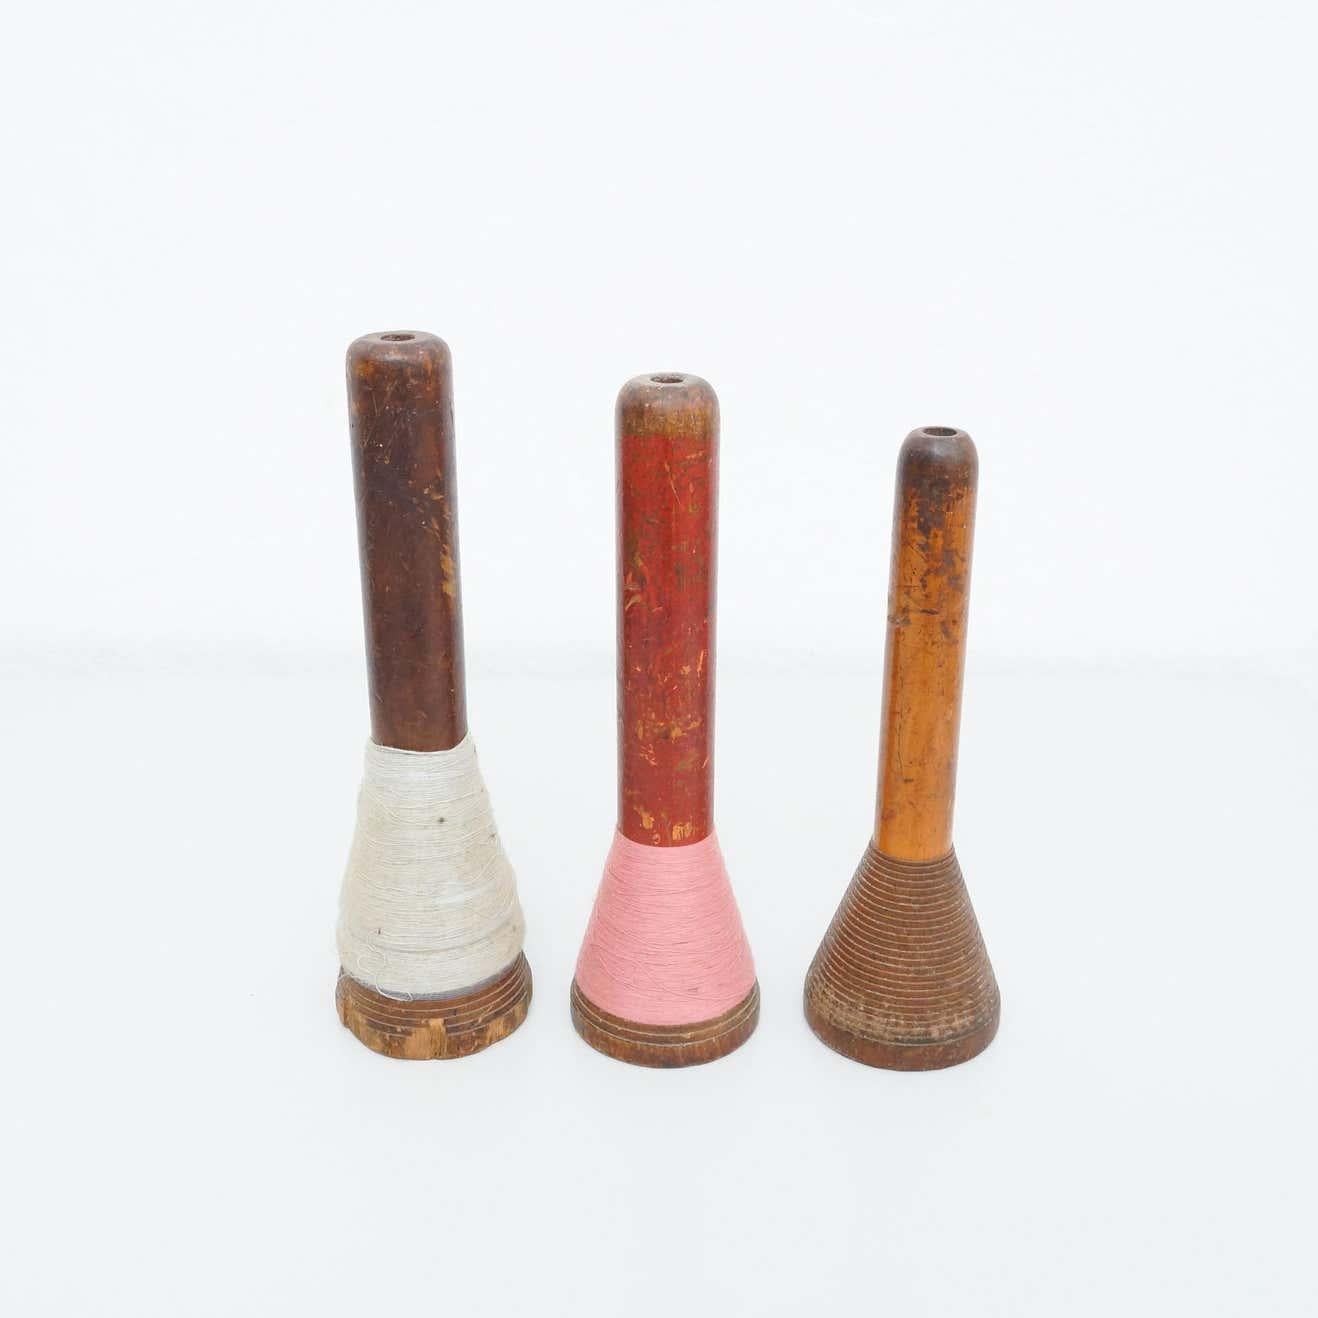 Rustic wooden spools of thread, by unknown manufacturer from Spain, circa 1930.

In original condition, with minor wear consistent with age and use, preserving a beautiful patina.

Materials:
Wood

Dimensions:
Ø 7.5 cm x H 27.5 cm.